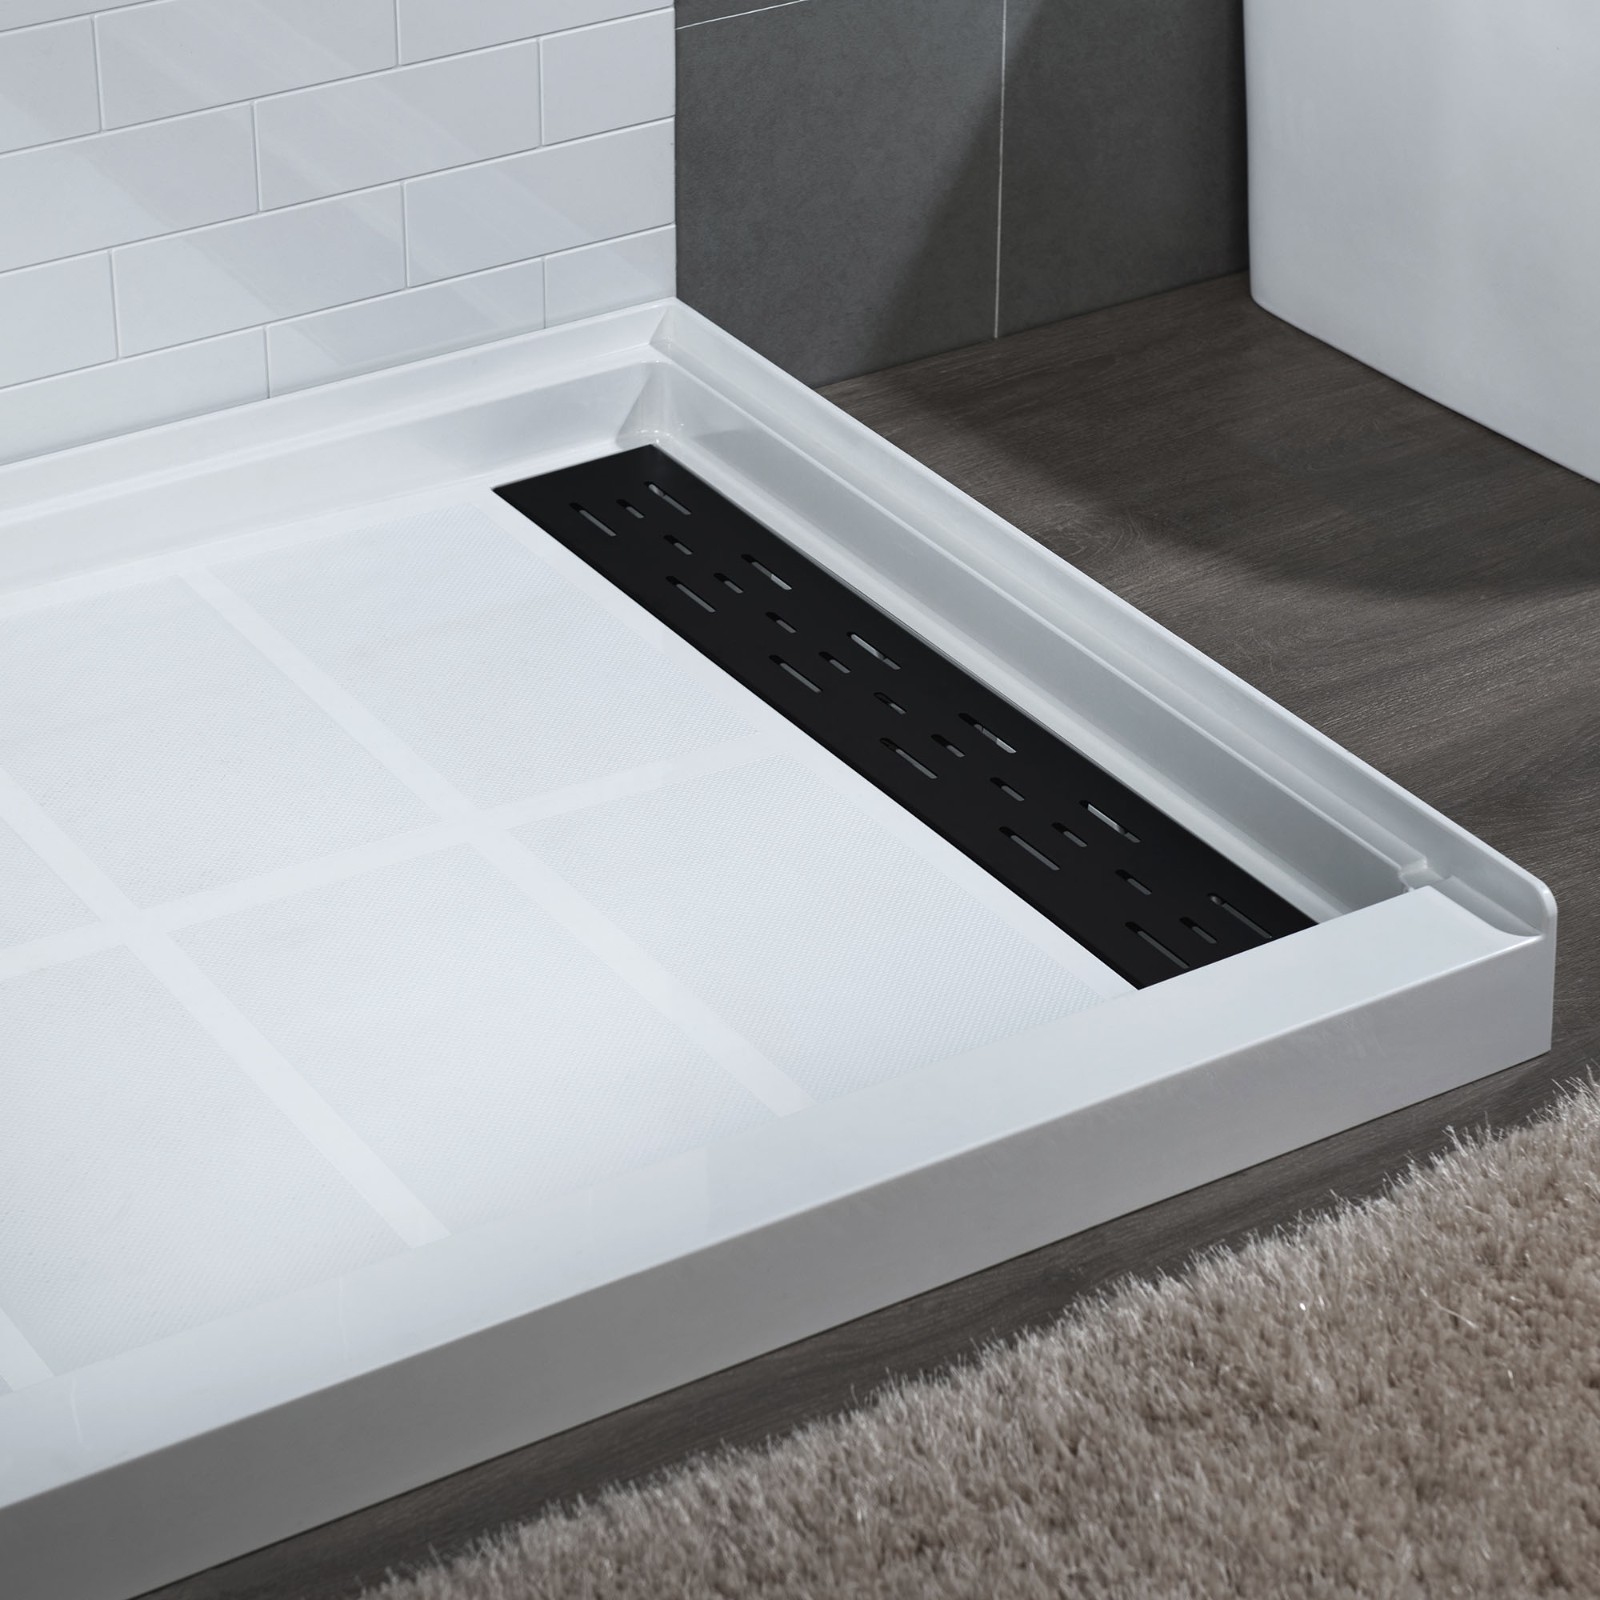  WOODBRIDGE SBR6030-1000R-MB SolidSurface Shower Base with Recessed Trench Side Including Matte Black Linear Cover, 60